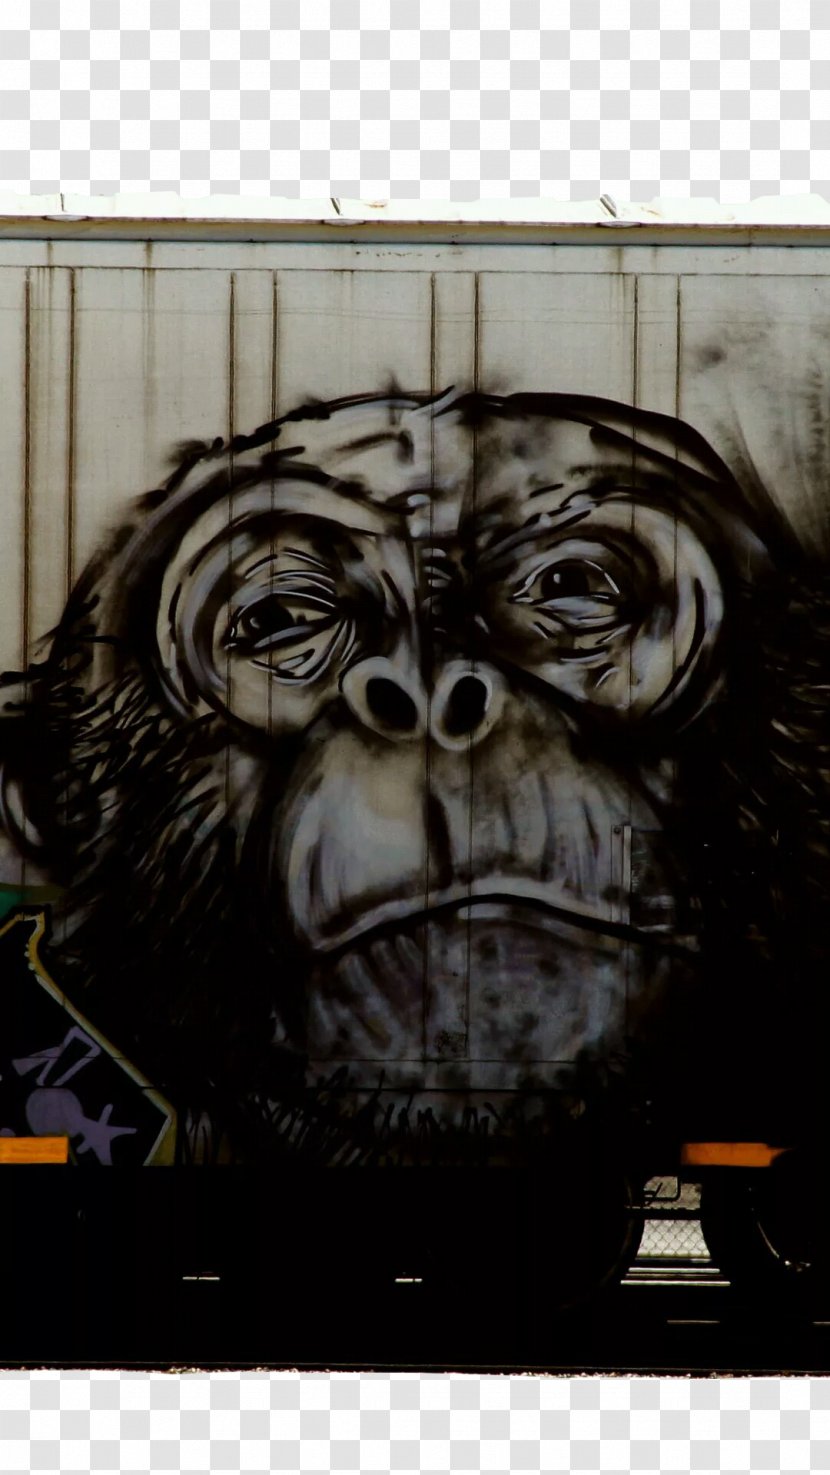 Freight Train Graffiti Wall Illustration - Monkey On The Transparent PNG